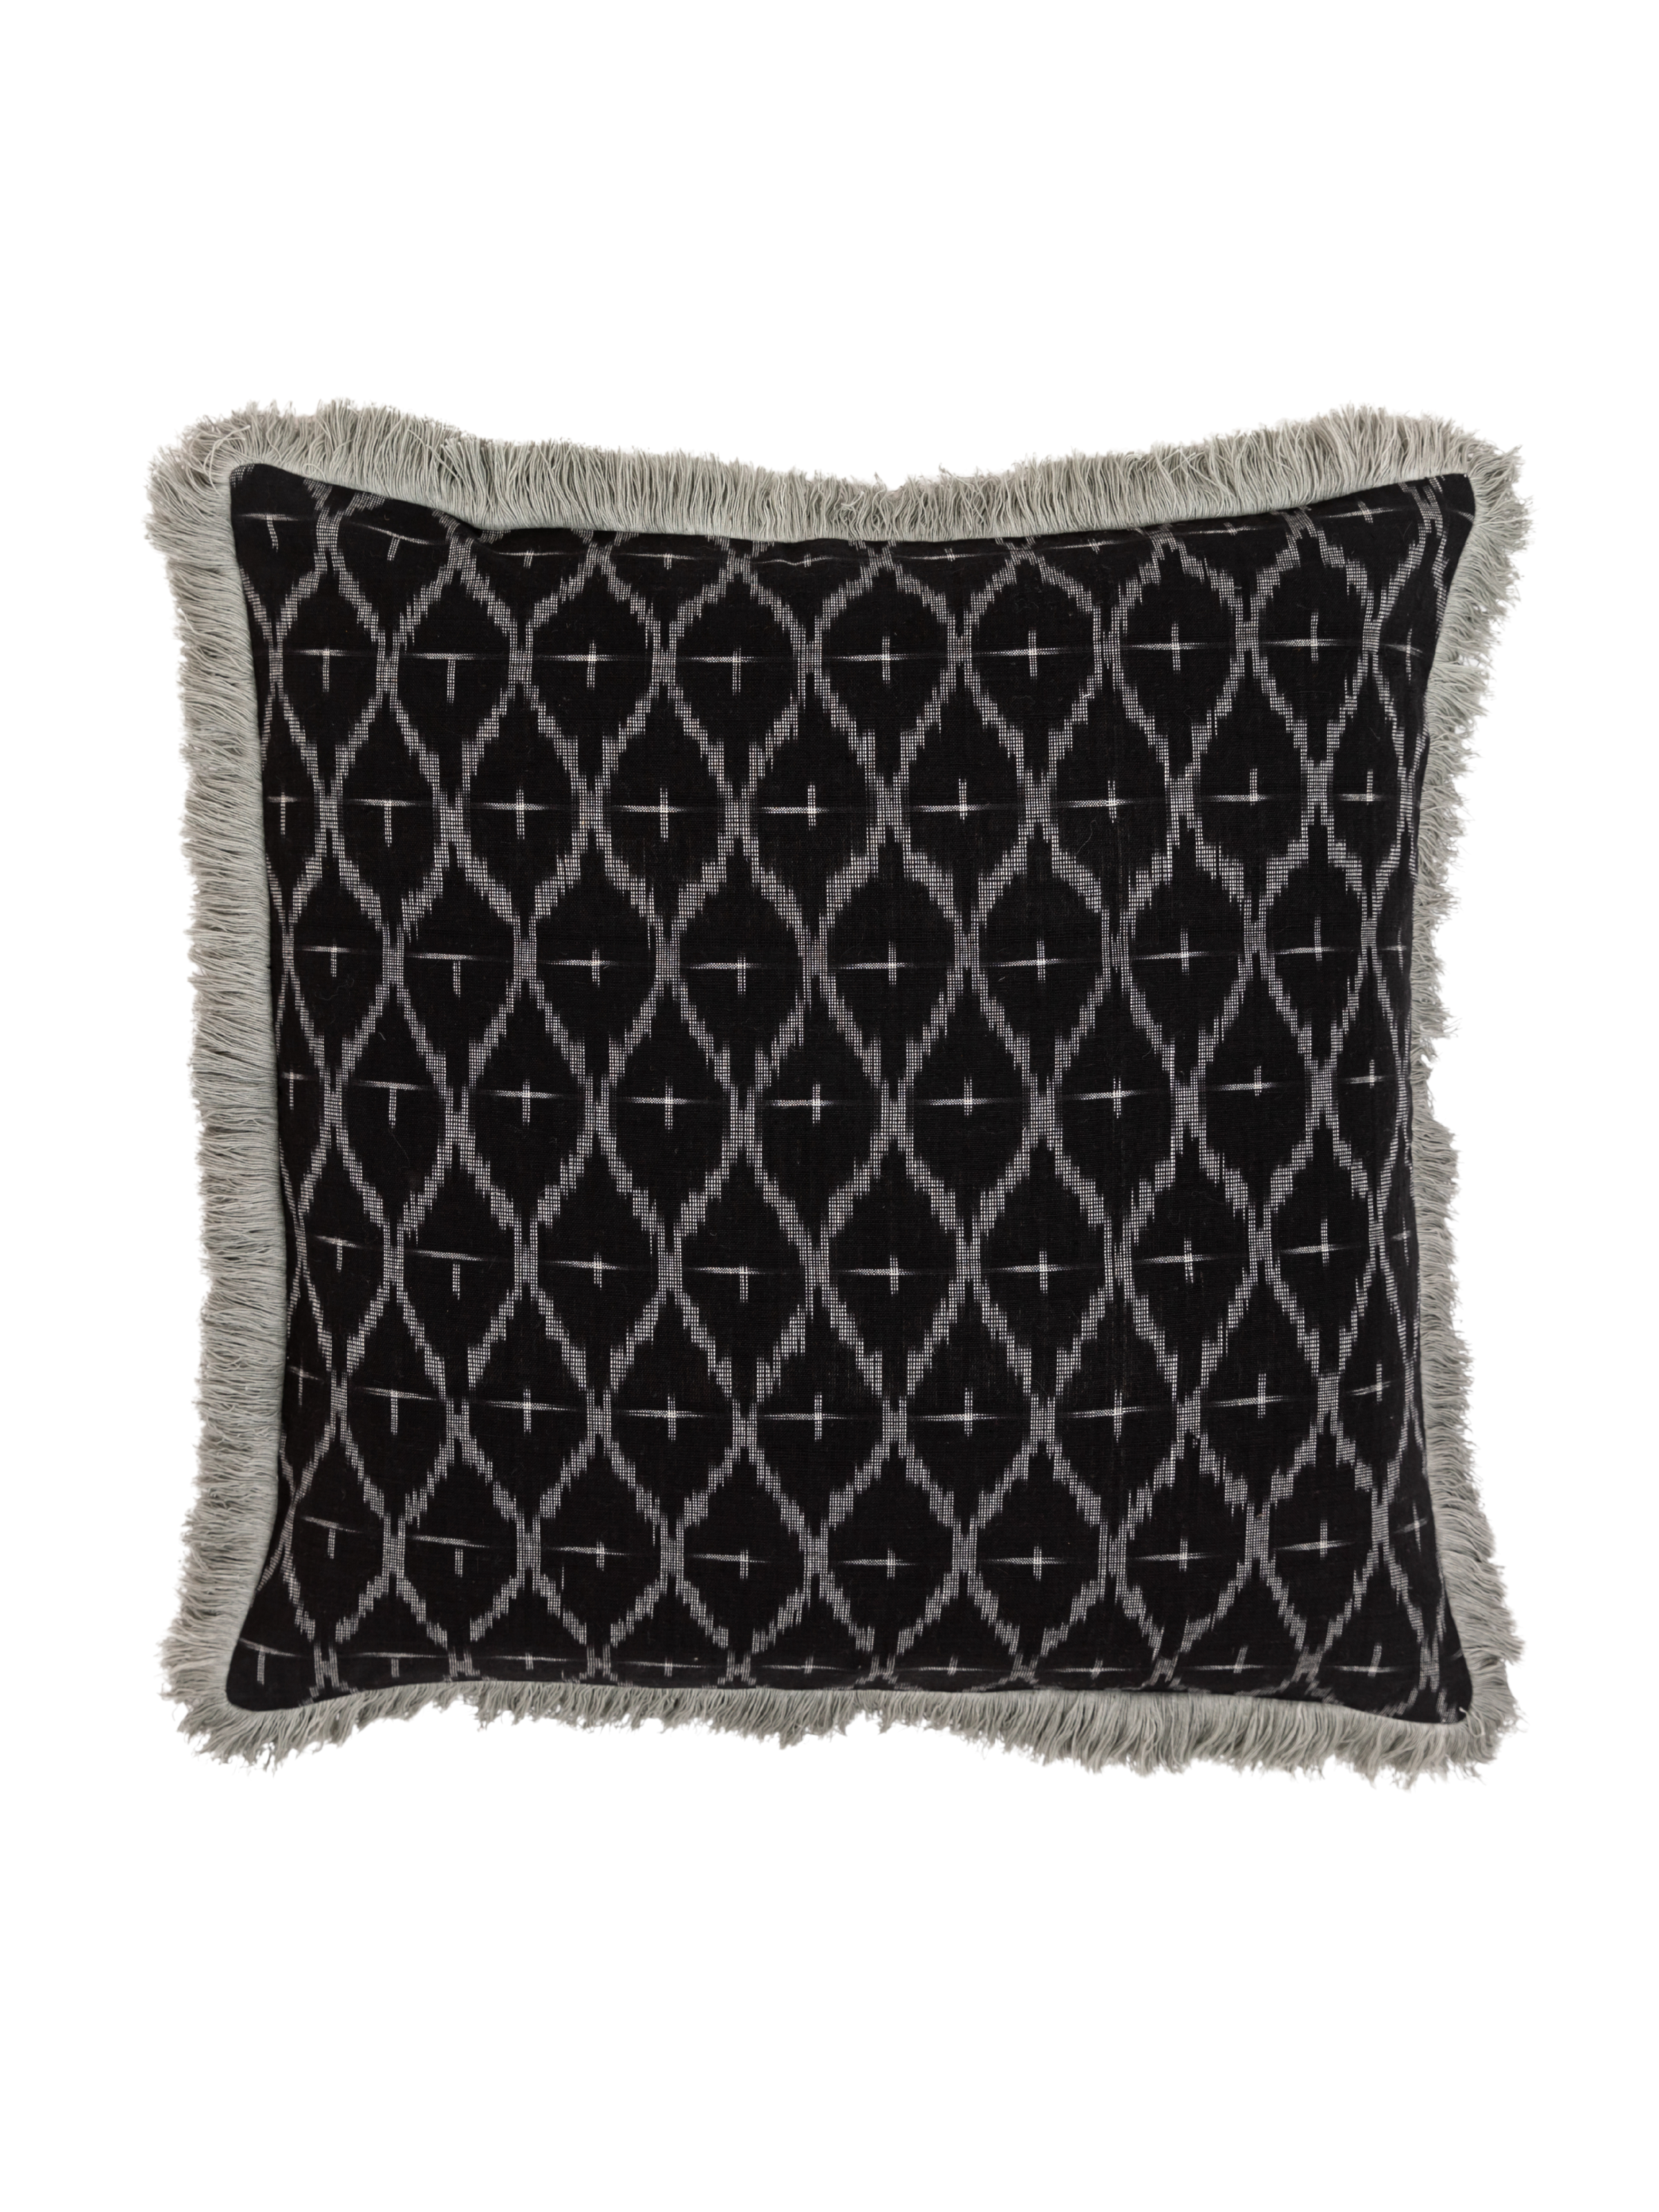 Charcoal Diamond Ikat Pillow Cover With Fringe